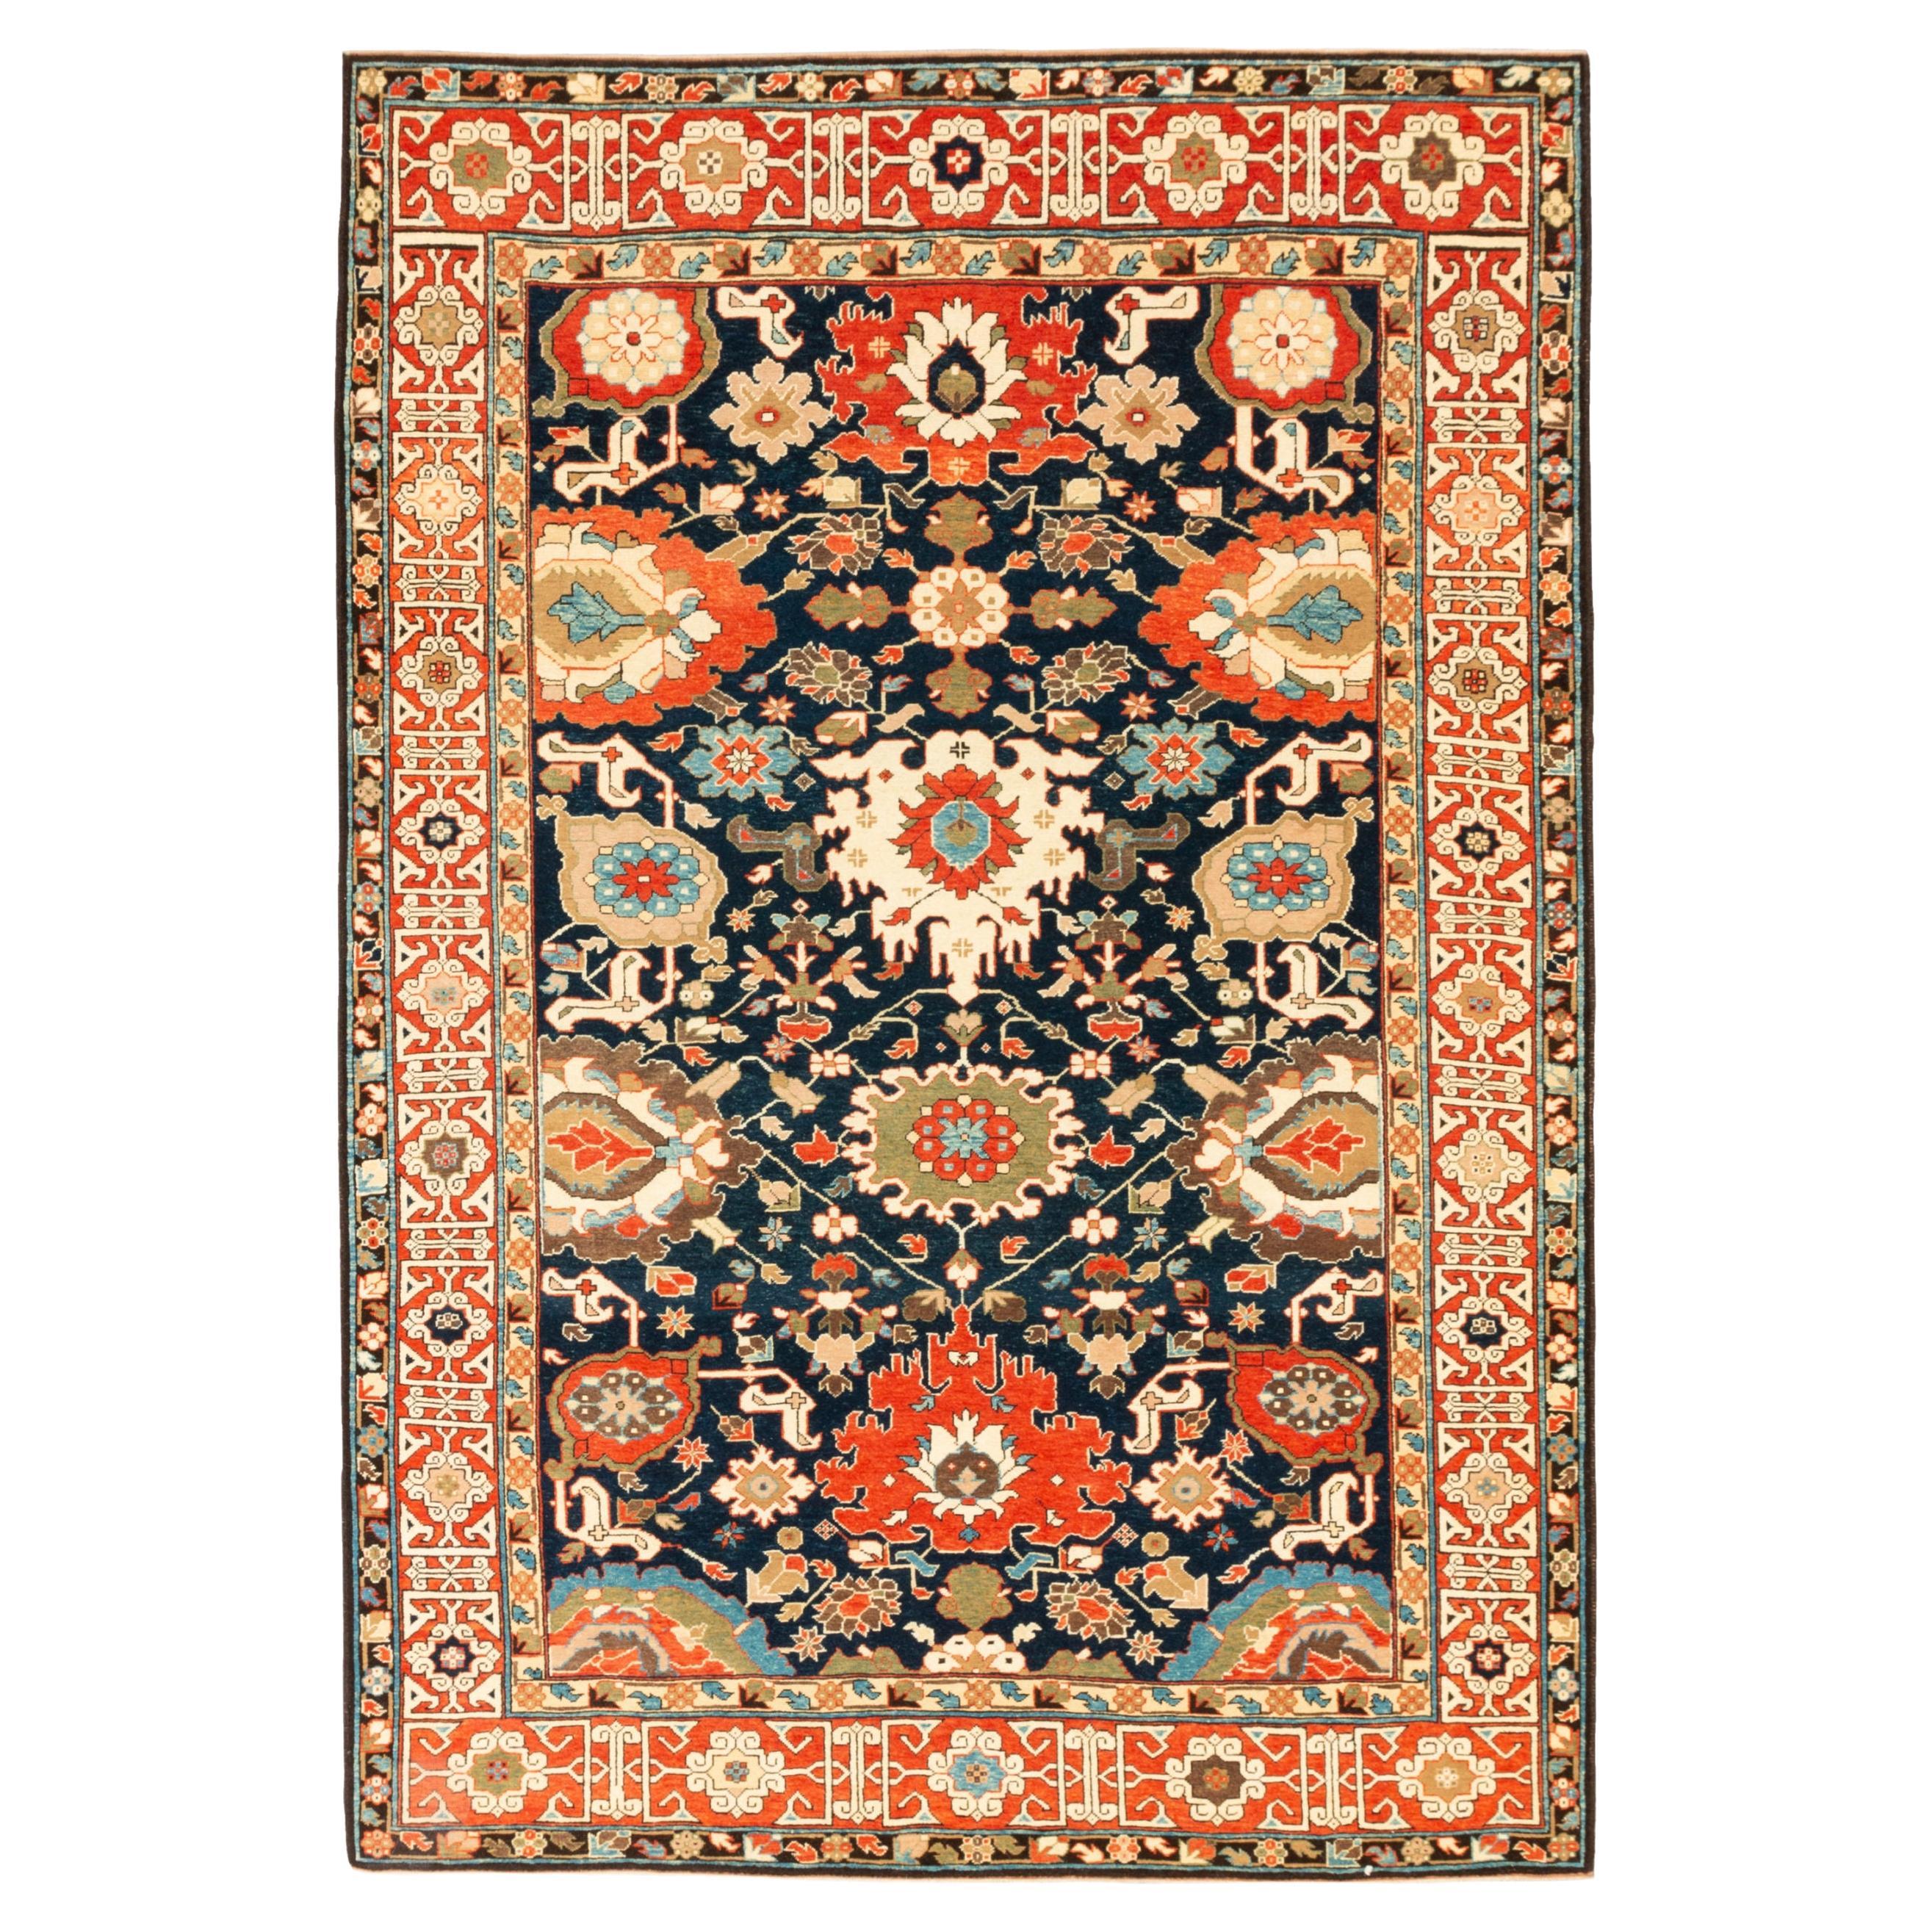 Ararat Rugs Harshang Design with Kufic Border Rug Revival Carpet, Natural Dyed For Sale